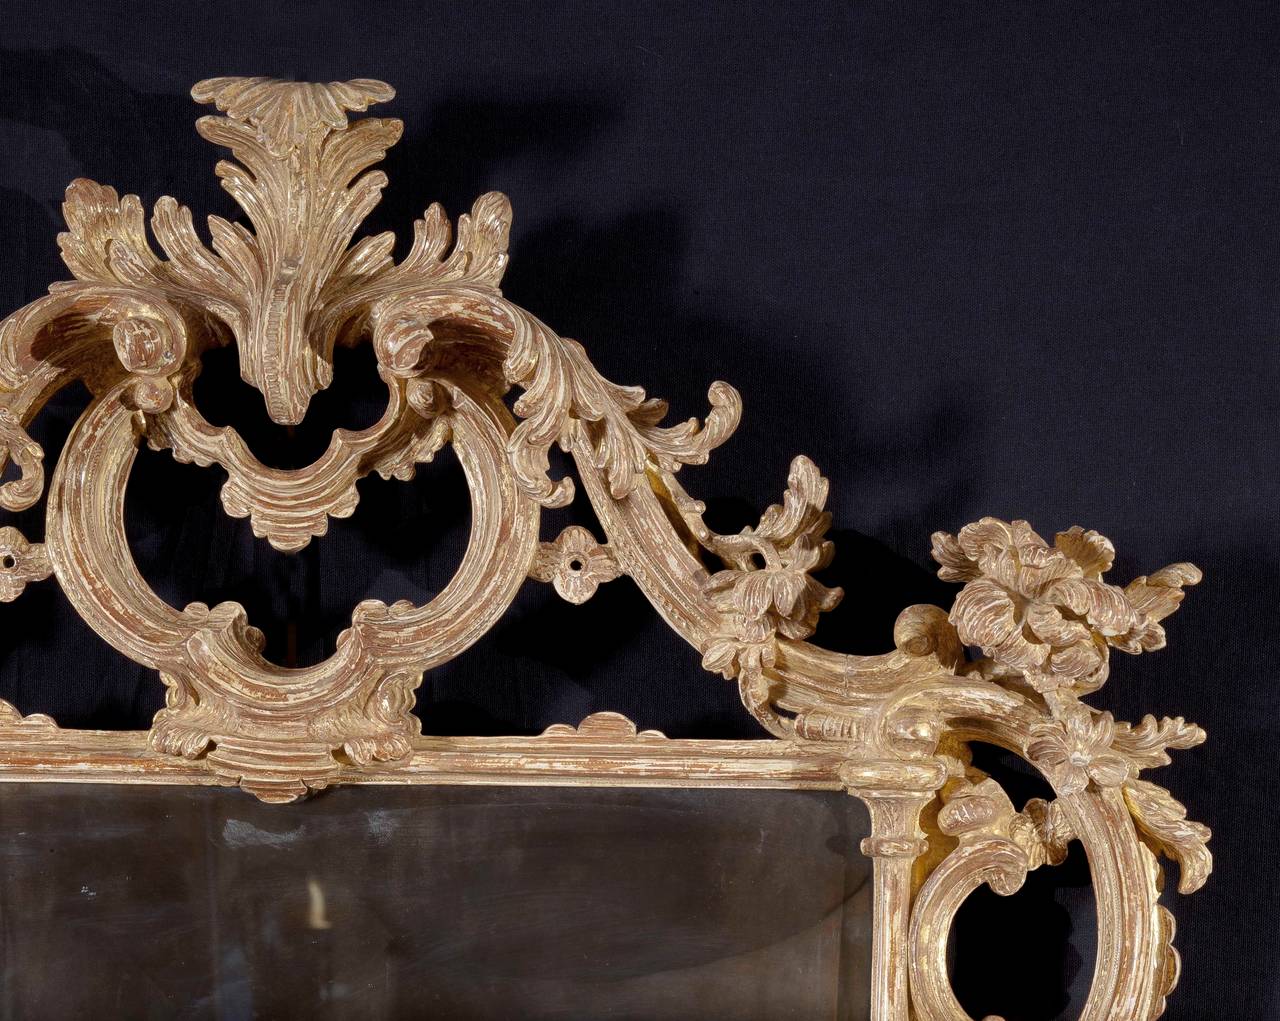 A carved beechwood rectangular rococo mirror with re-silvered original glass, and a finely carved and detailed frame, which is crested with a scrolled acanthus leaf resting on double C-scrolls with C-scrolls bracketing the sides of the frame, having